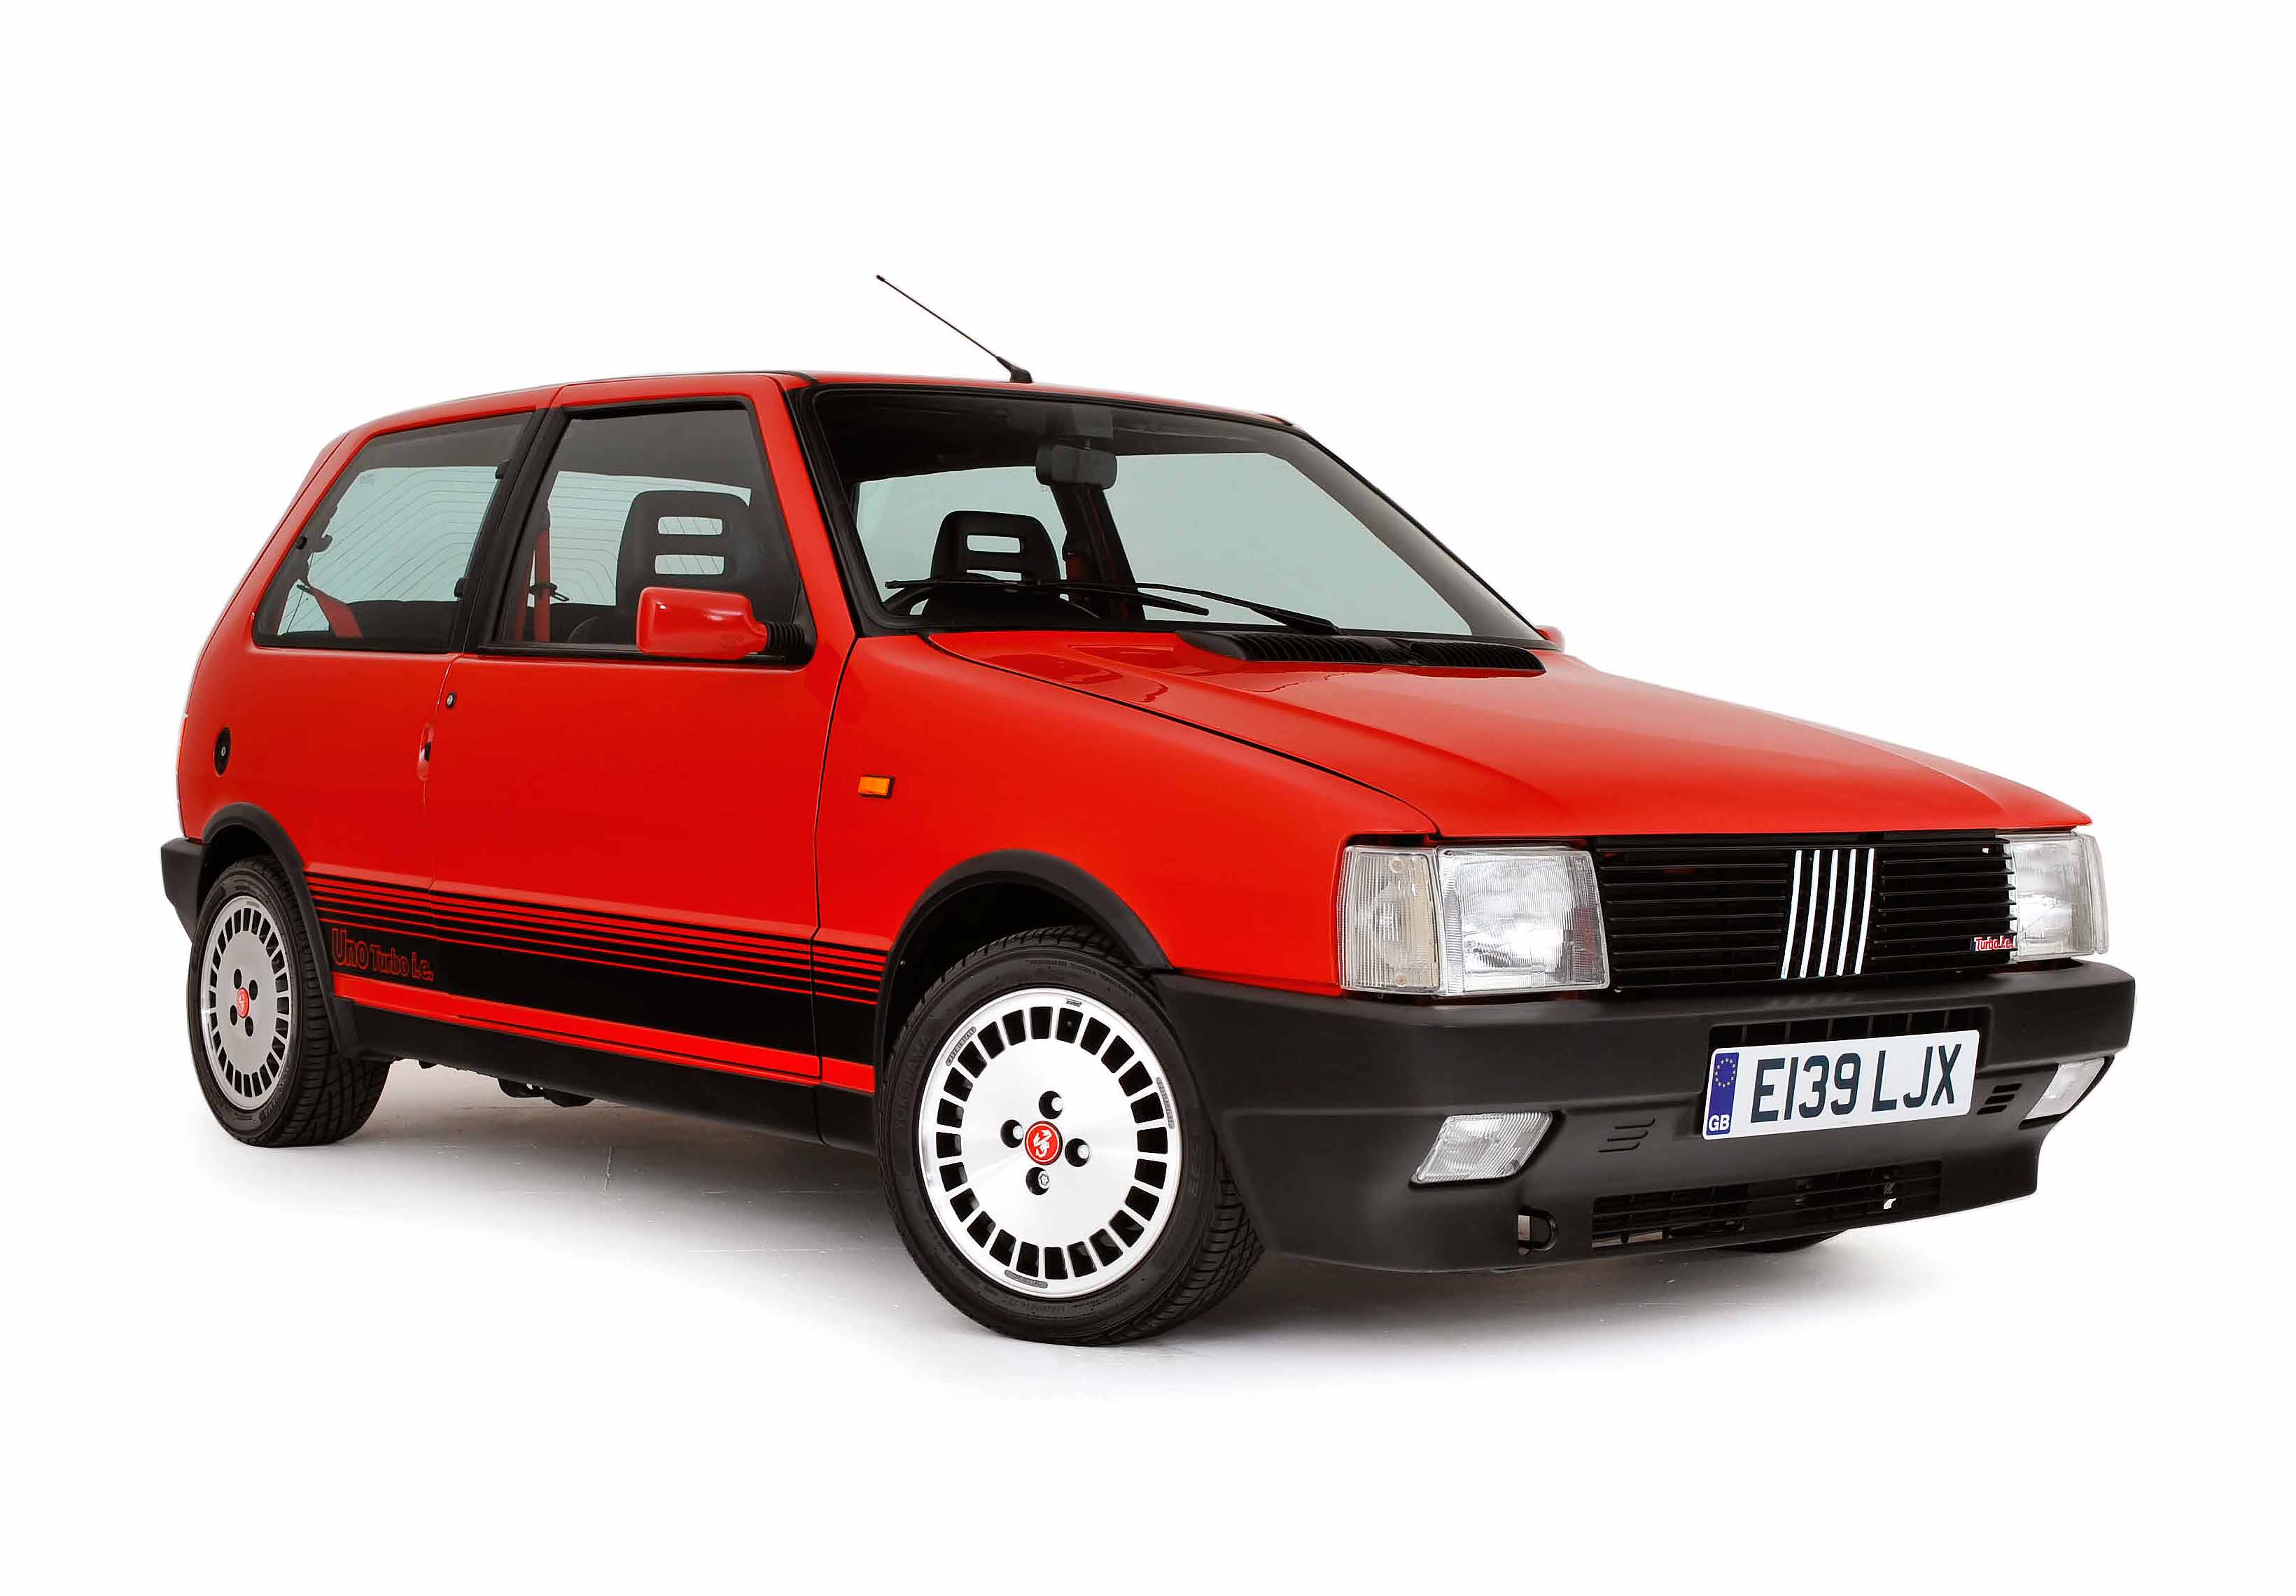 Buyers' Guide Fiat Uno Turbo Type 146 Mk1 and Mk2 Drive